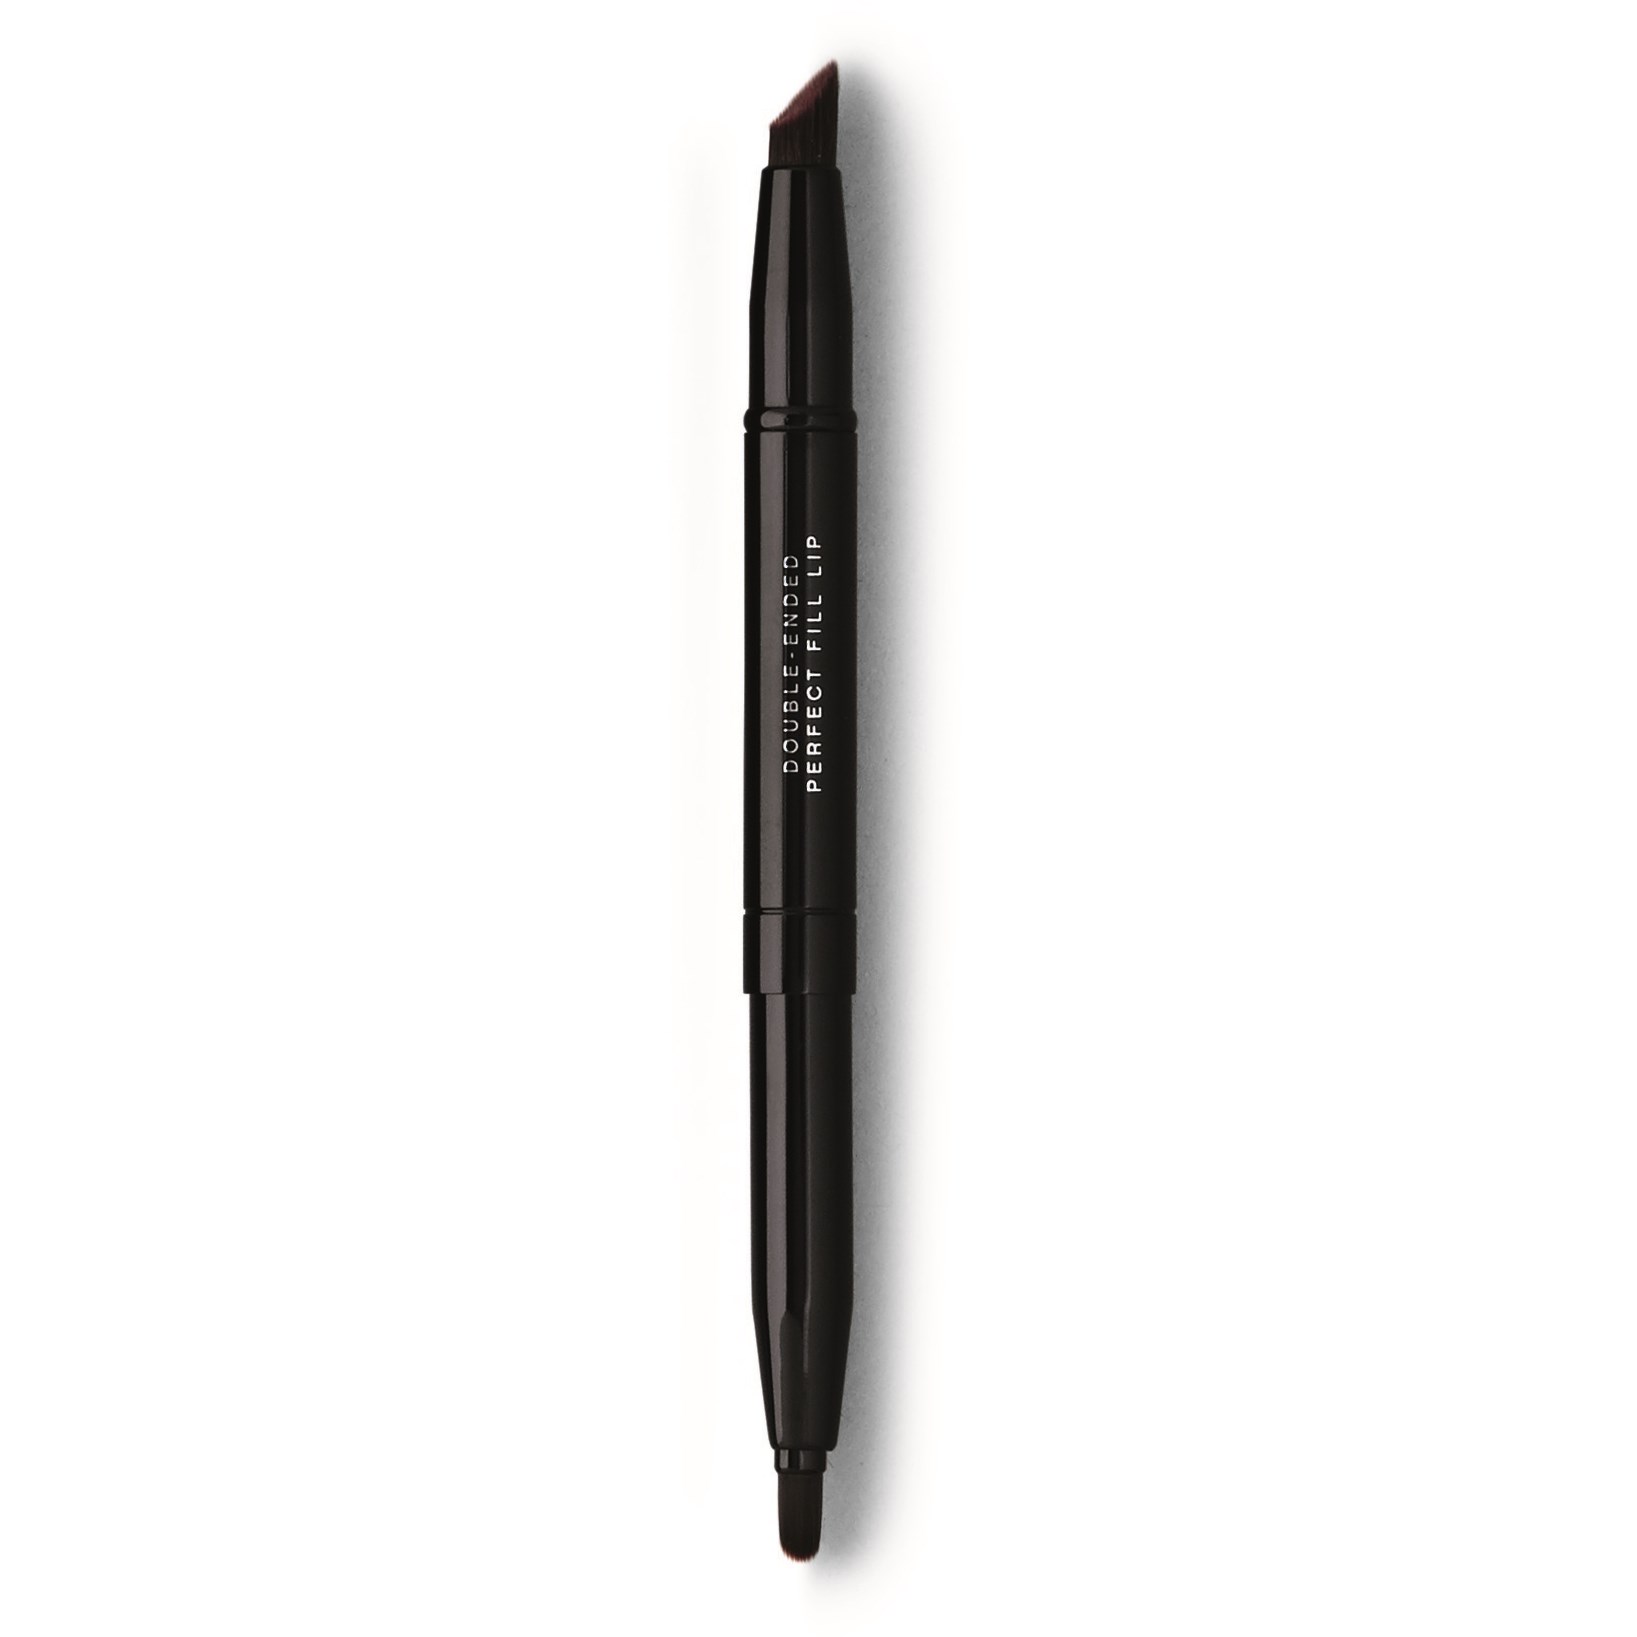 bareMinerals Double Ended Perfect Fill Lip Brush